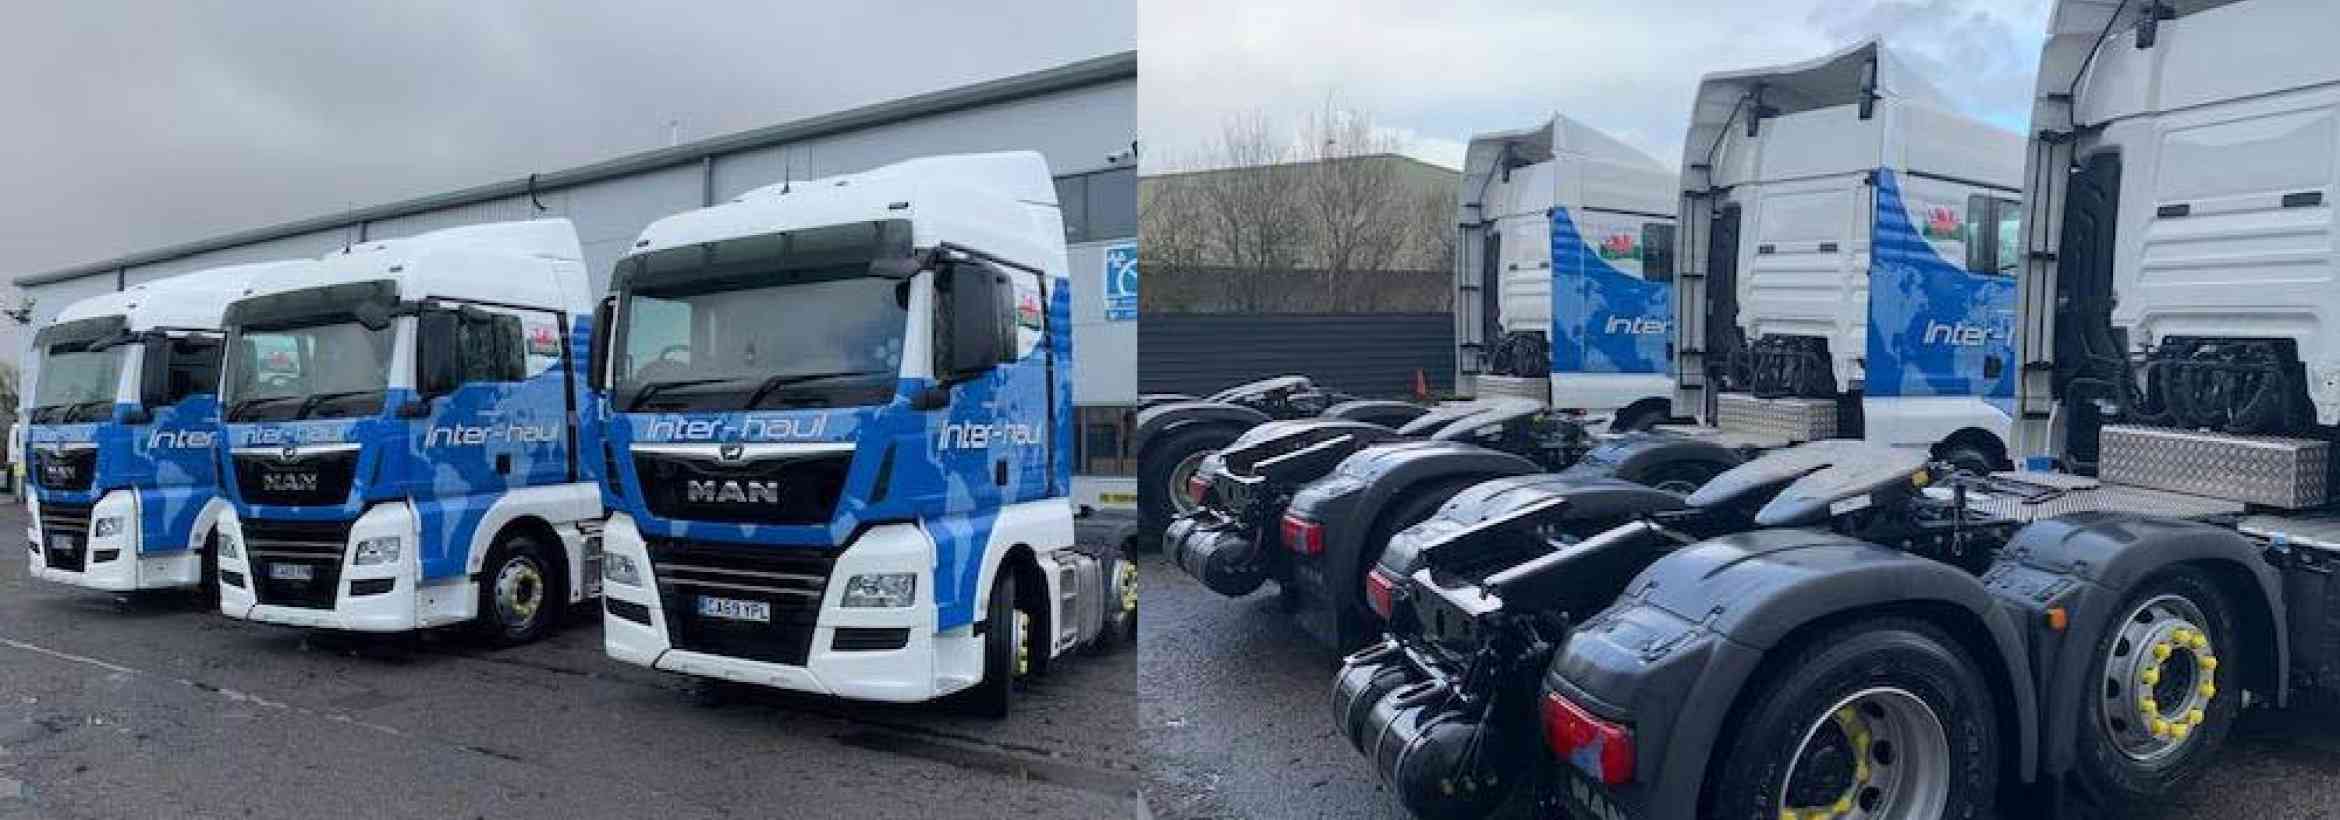 Inter-haul’s fleet continues to grow with MAN TGXs from WG Davies Cardiff